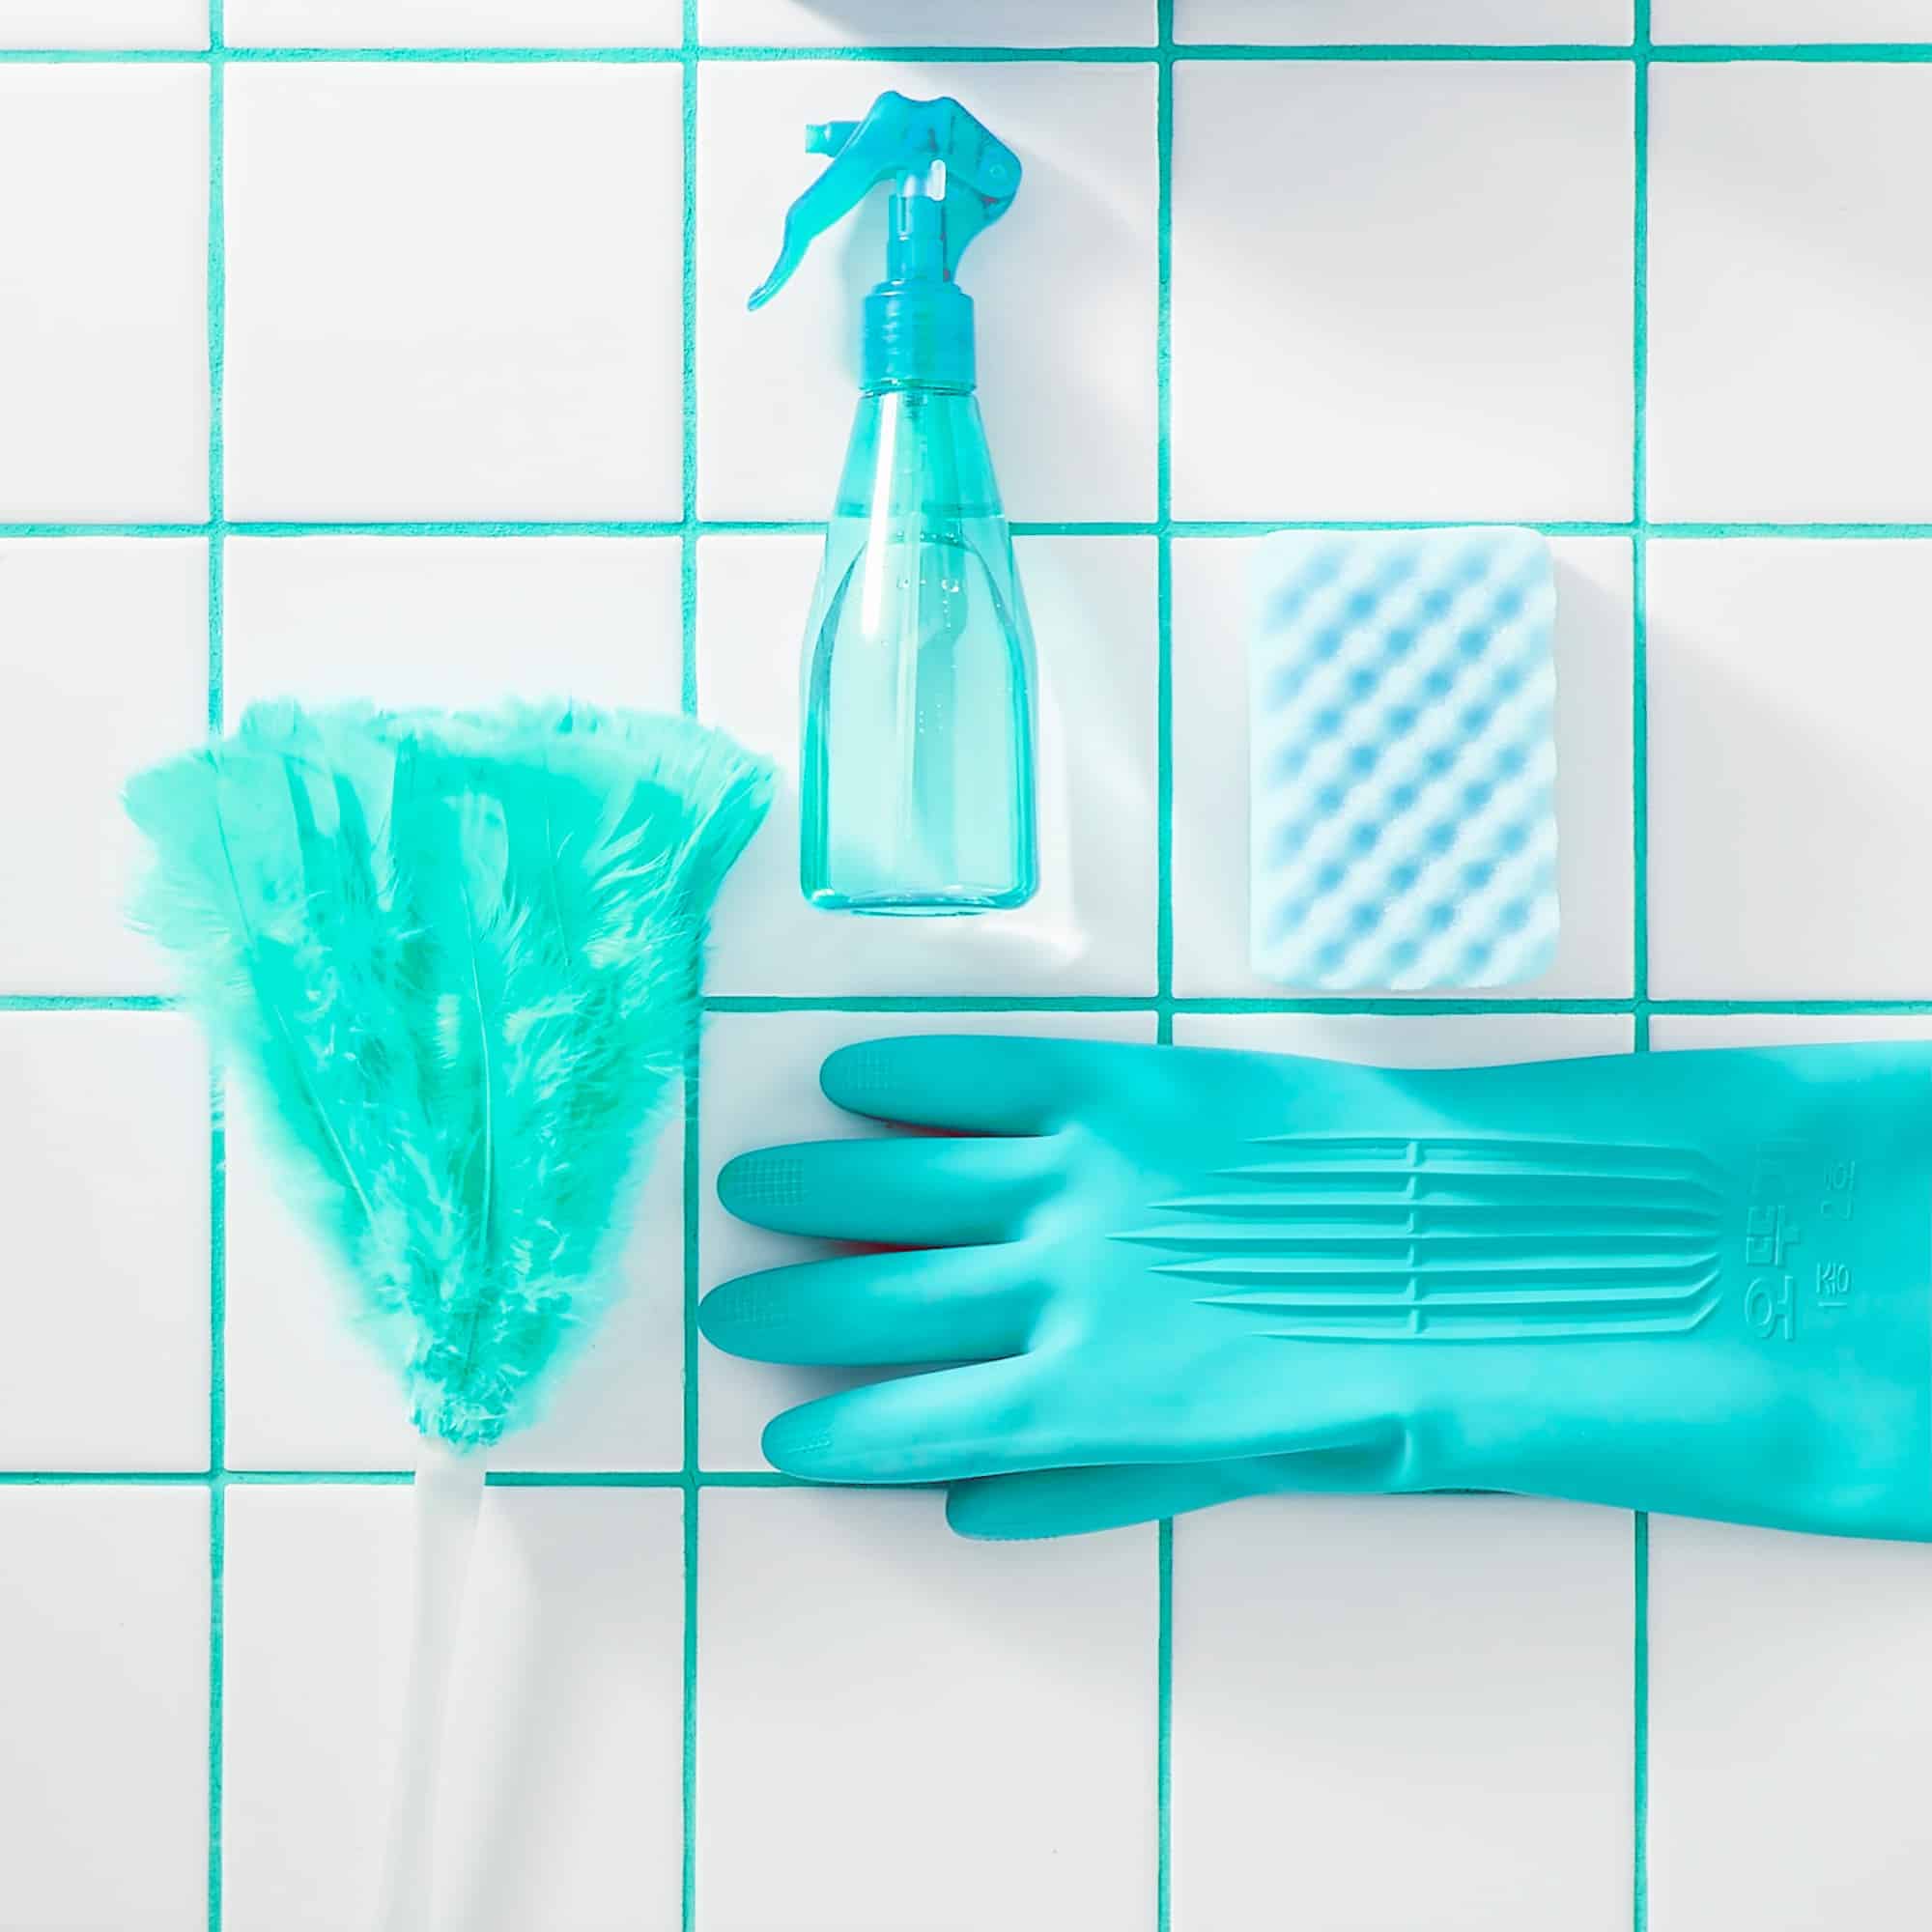 How to Disinfect Your House and Houseware